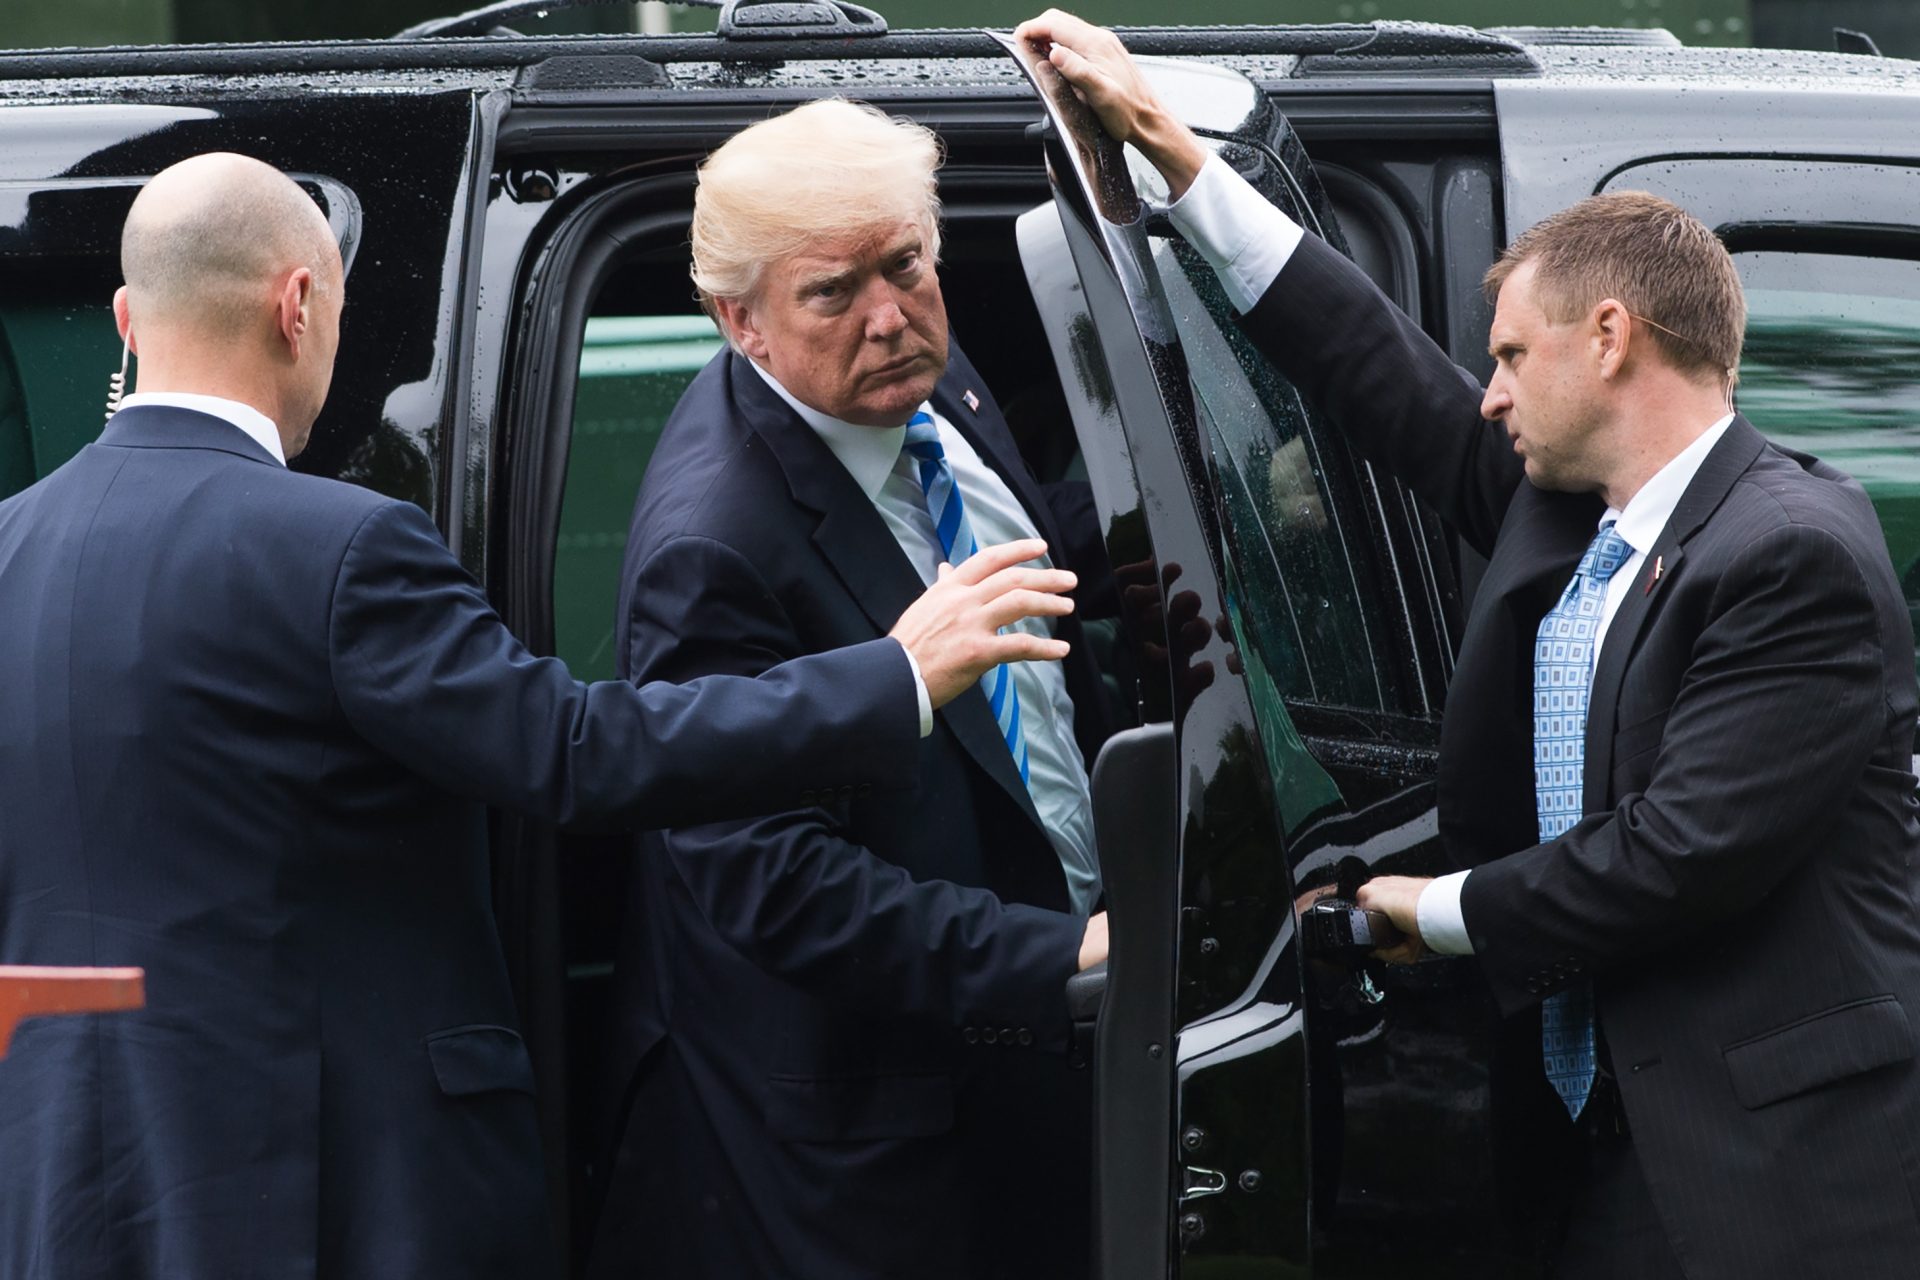 What happened inside the presidential SUV?